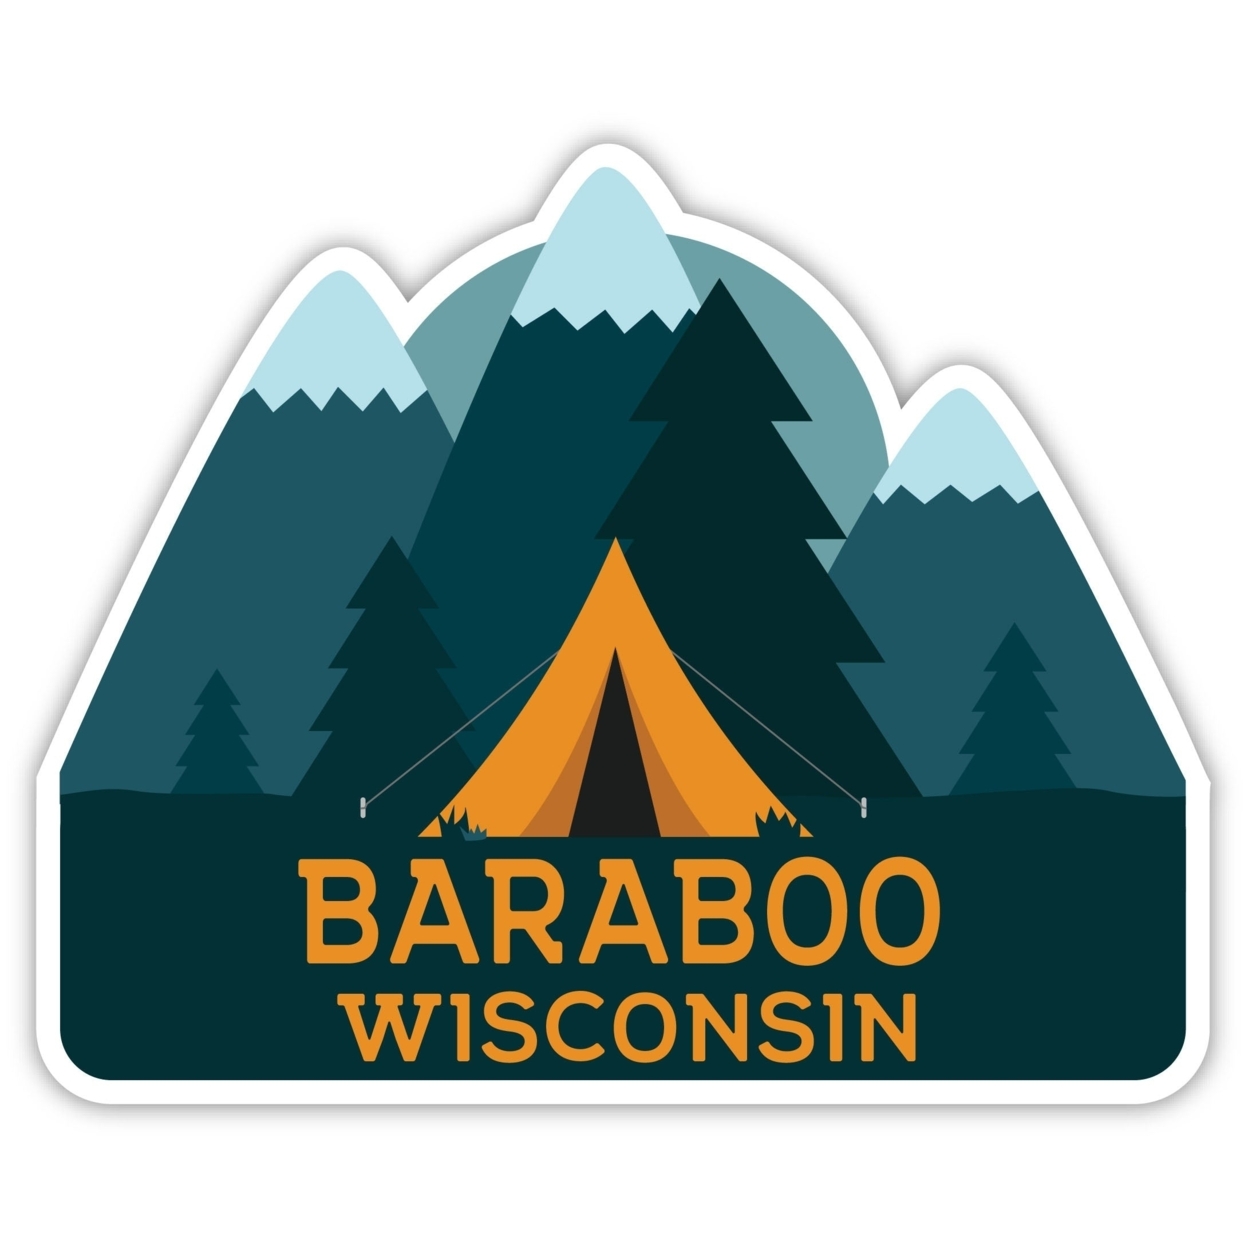 Baraboo Wisconsin Souvenir Decorative Stickers (Choose Theme And Size) - Single Unit, 10-Inch, Tent